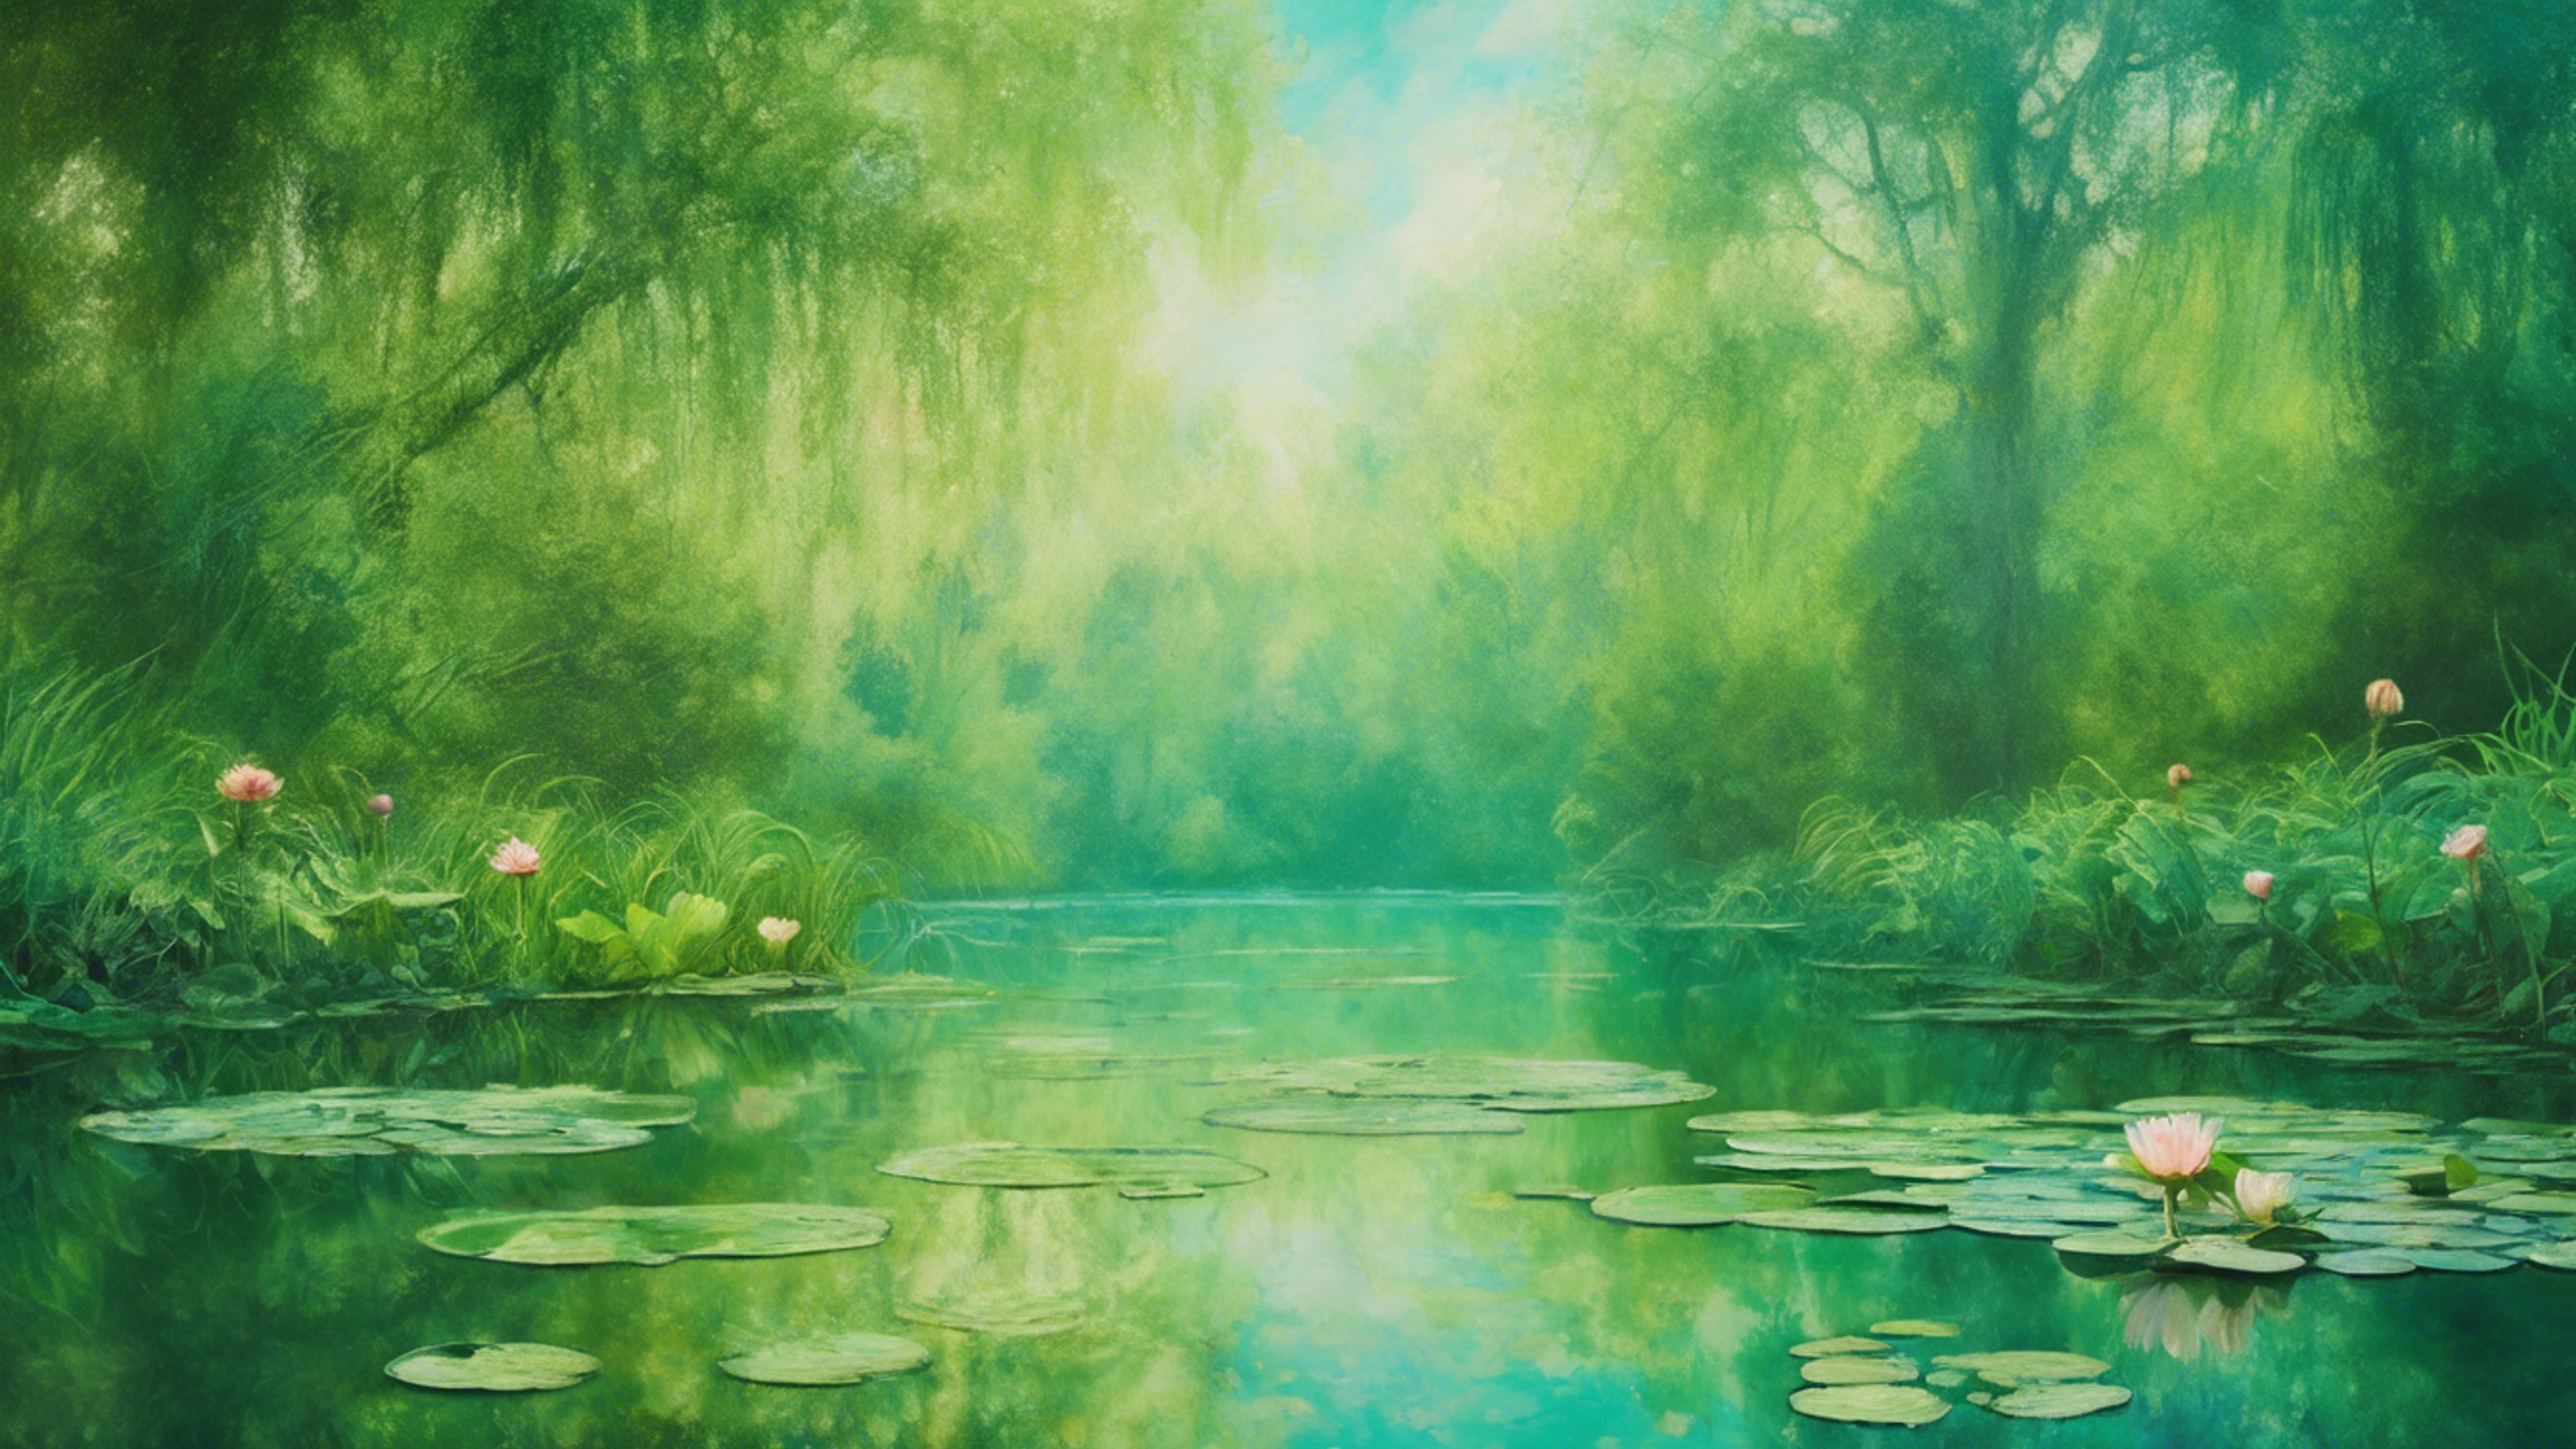 A landscape painting inspired by Monet's Water Lilies, with cool green hues. Tapeta[9f0abb477fe746e08ba1]